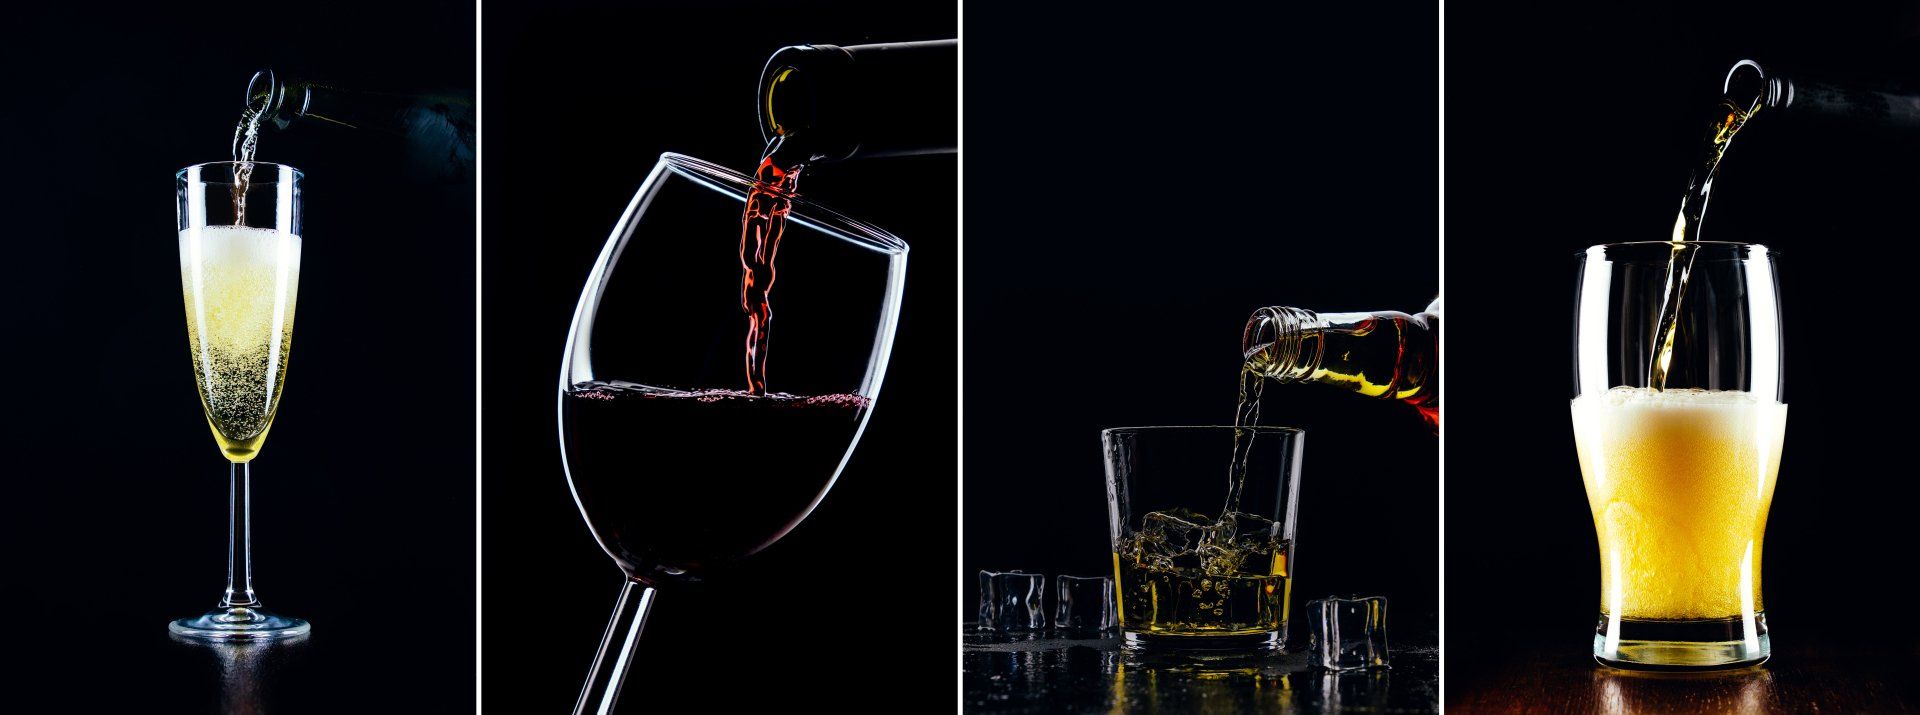 Collage of alcohol pouring on black background. Champagne, wine, whiskey and beer